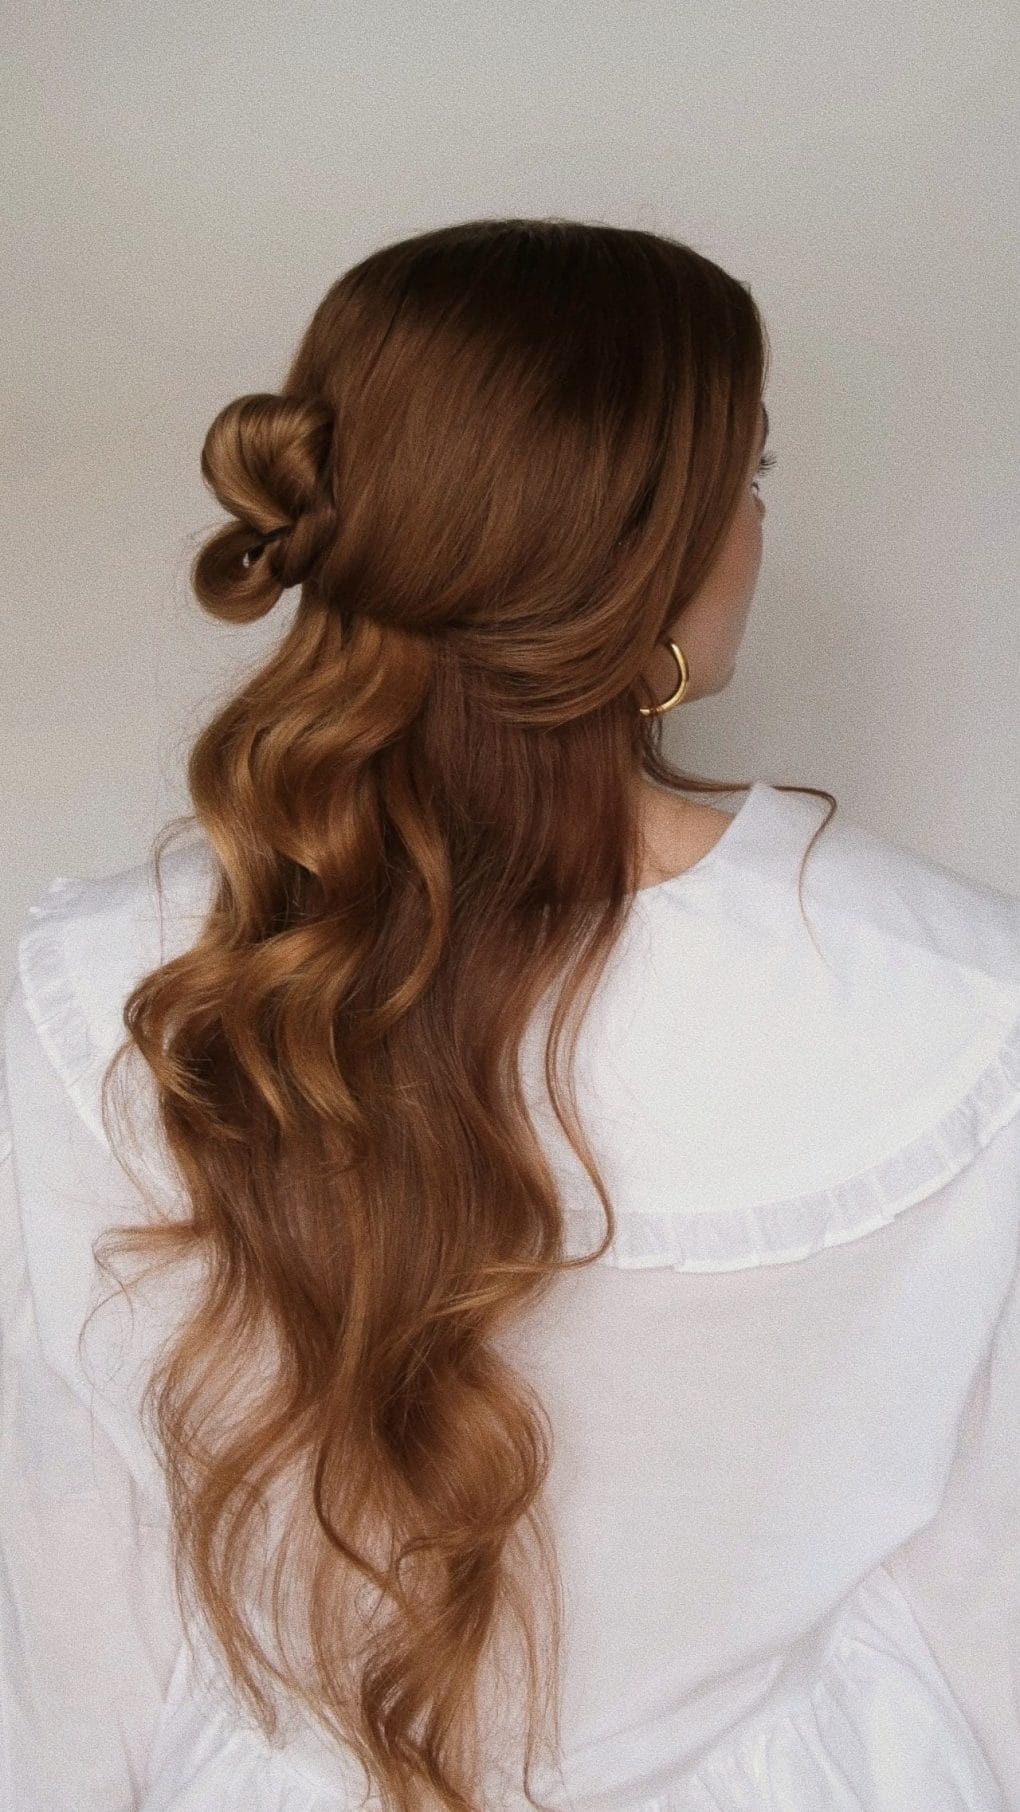 Romantic half up half down style with warm caramel waves